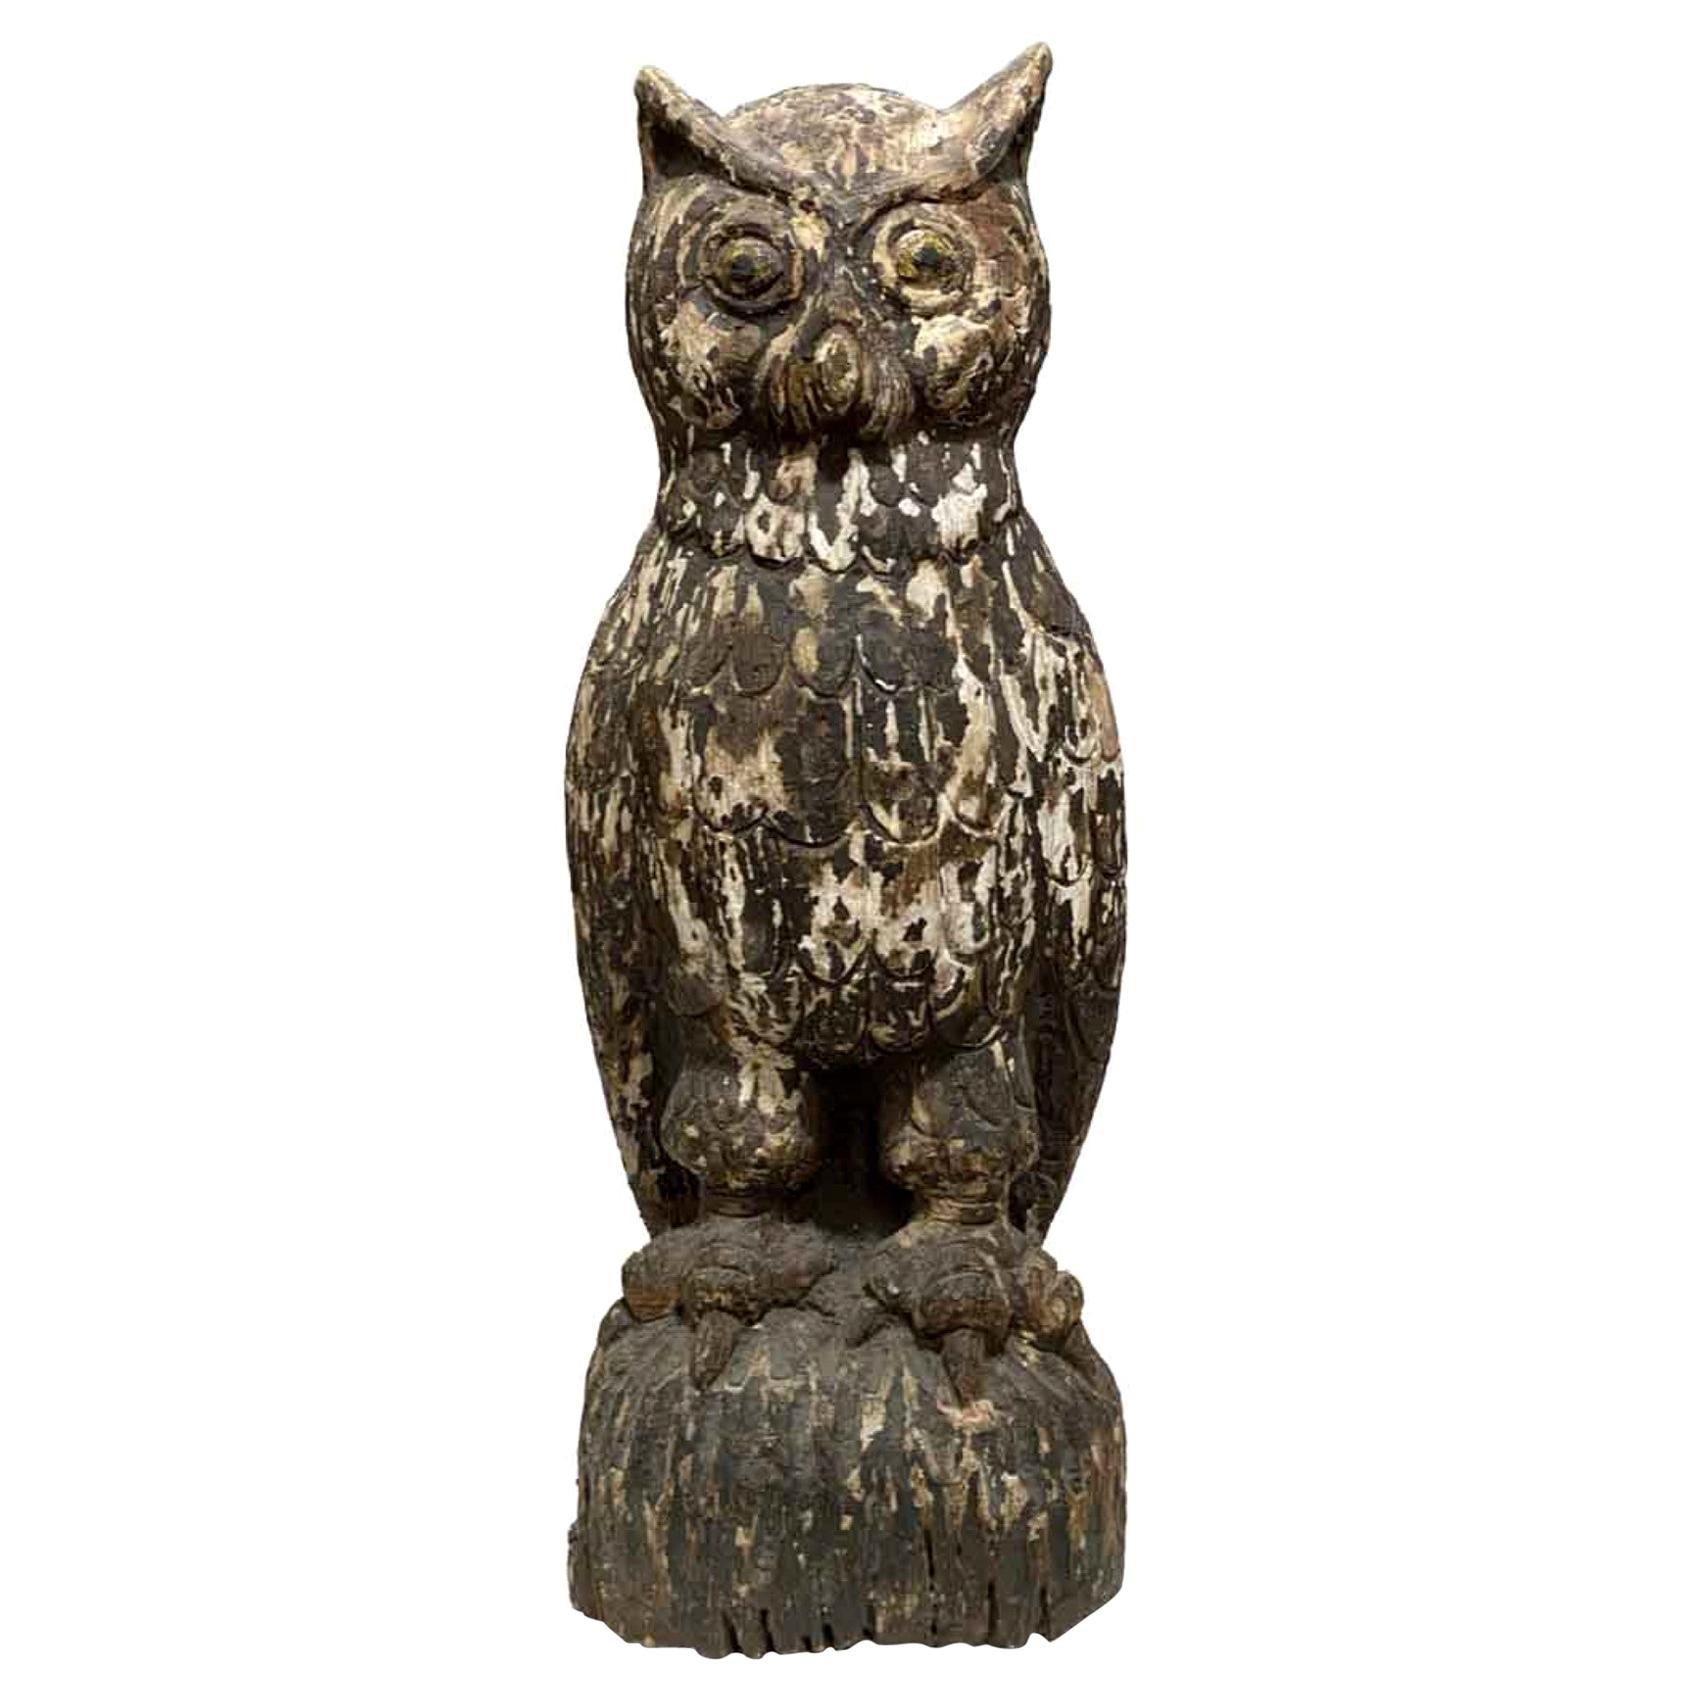 1940s Primitive Hand Carved Wood Owl Statue with Original Weathered Patina